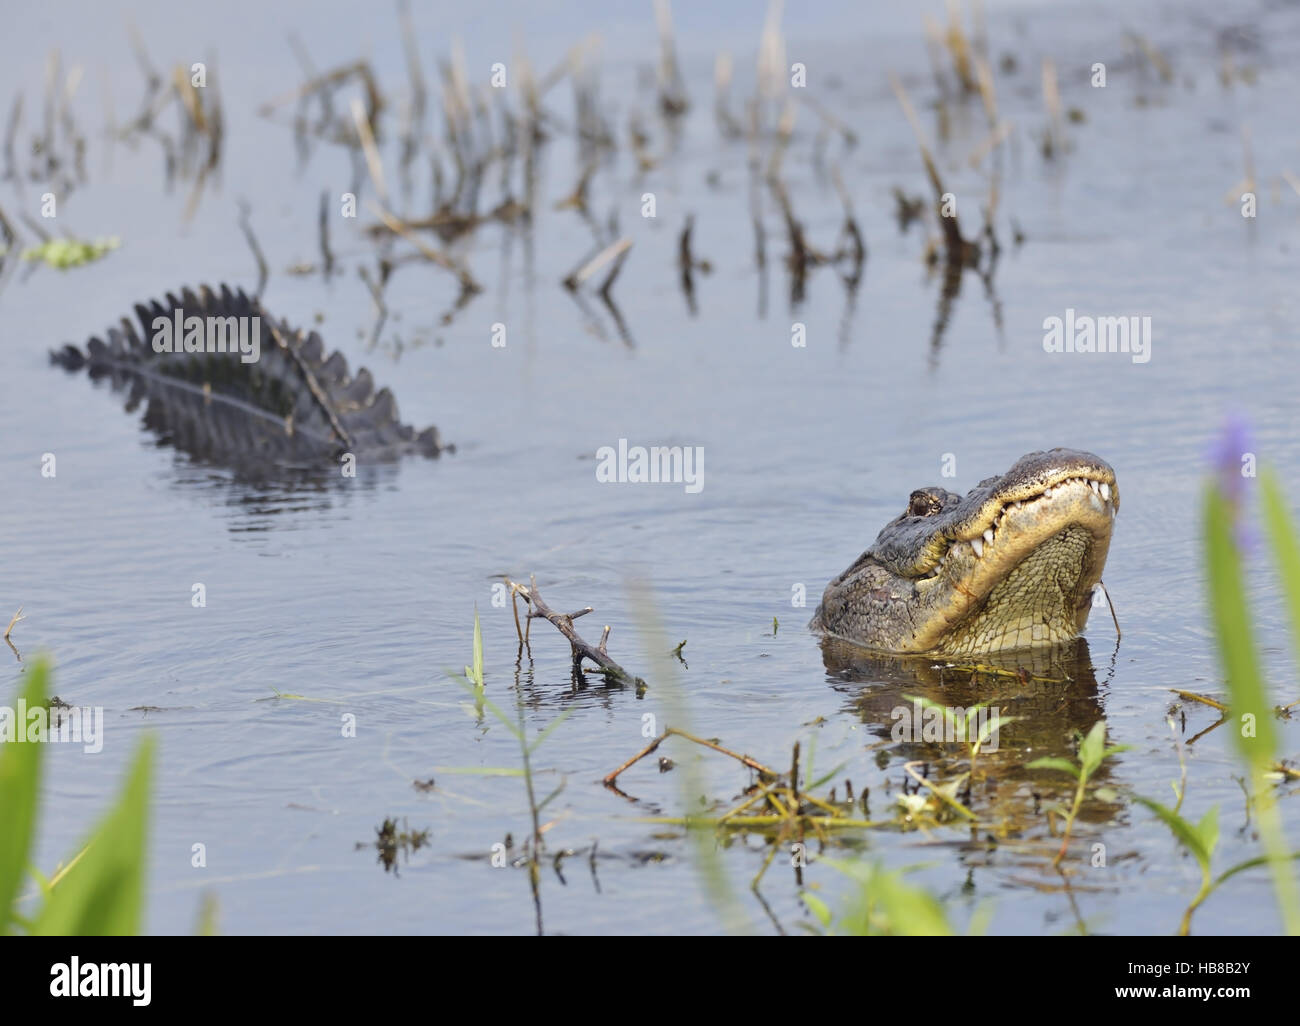 Alligator Growling for a Mate Stock Photo